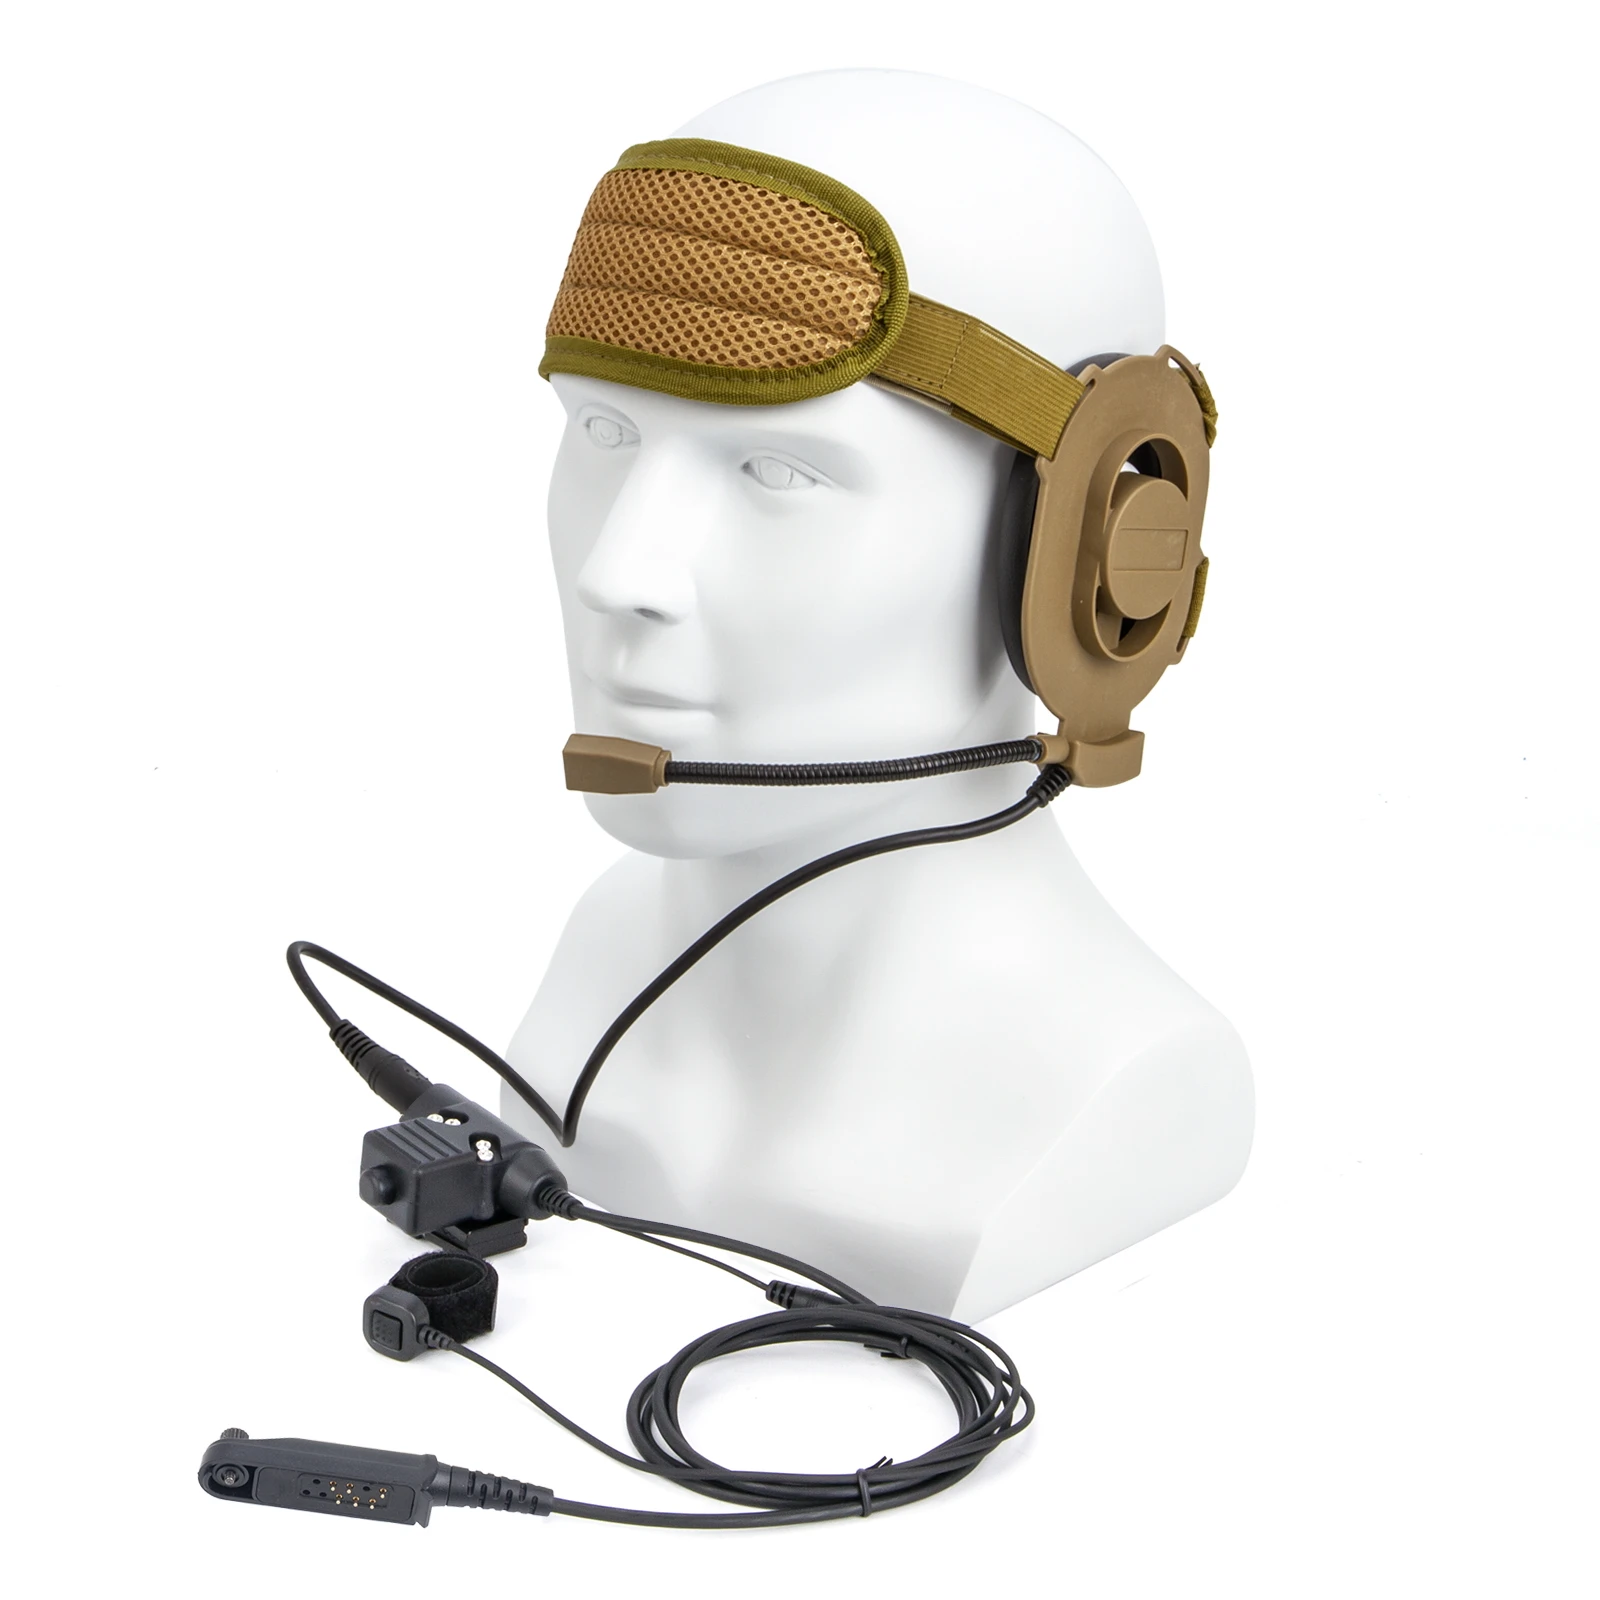 U94 PTT and Finger Microphone PTT with brown HD01 Tactical Bowman Elite II Radio Headset Earpiece for UV-XR UV-9R